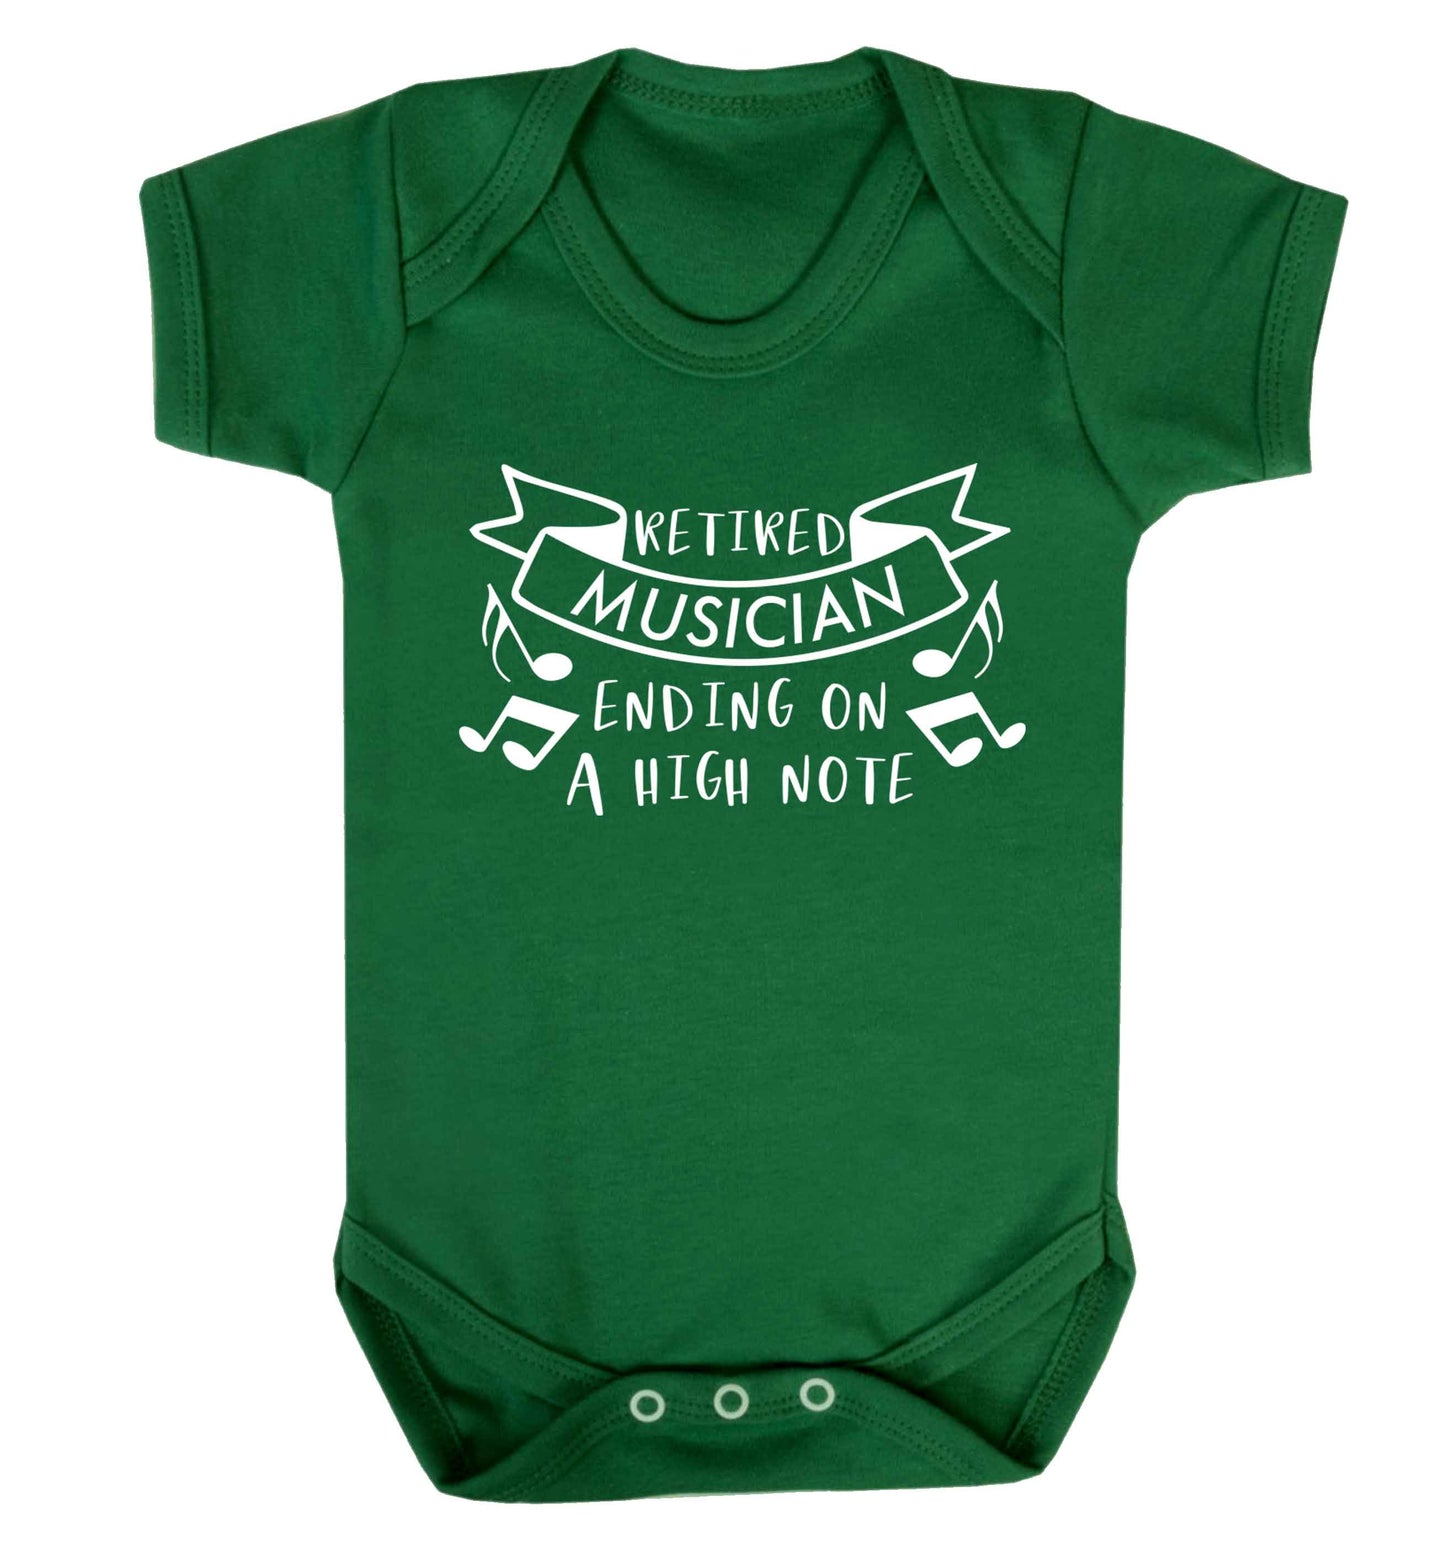 Retired musician ending on a high note Baby Vest green 18-24 months